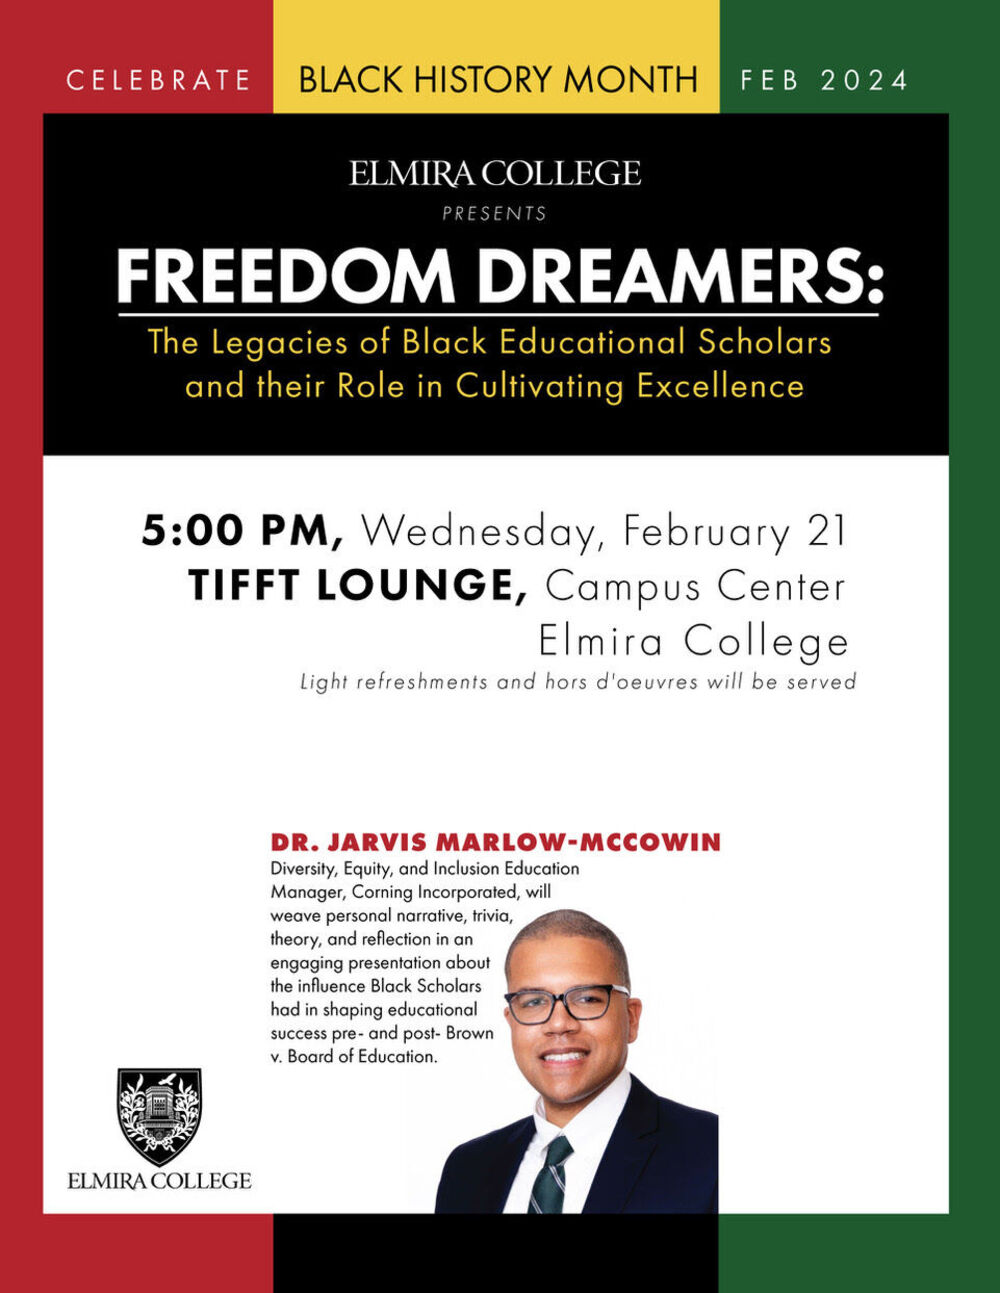 freedom-dreamers-the-legacies-of-black-educational-scholars-and-their-role-in-cultivating-excellence